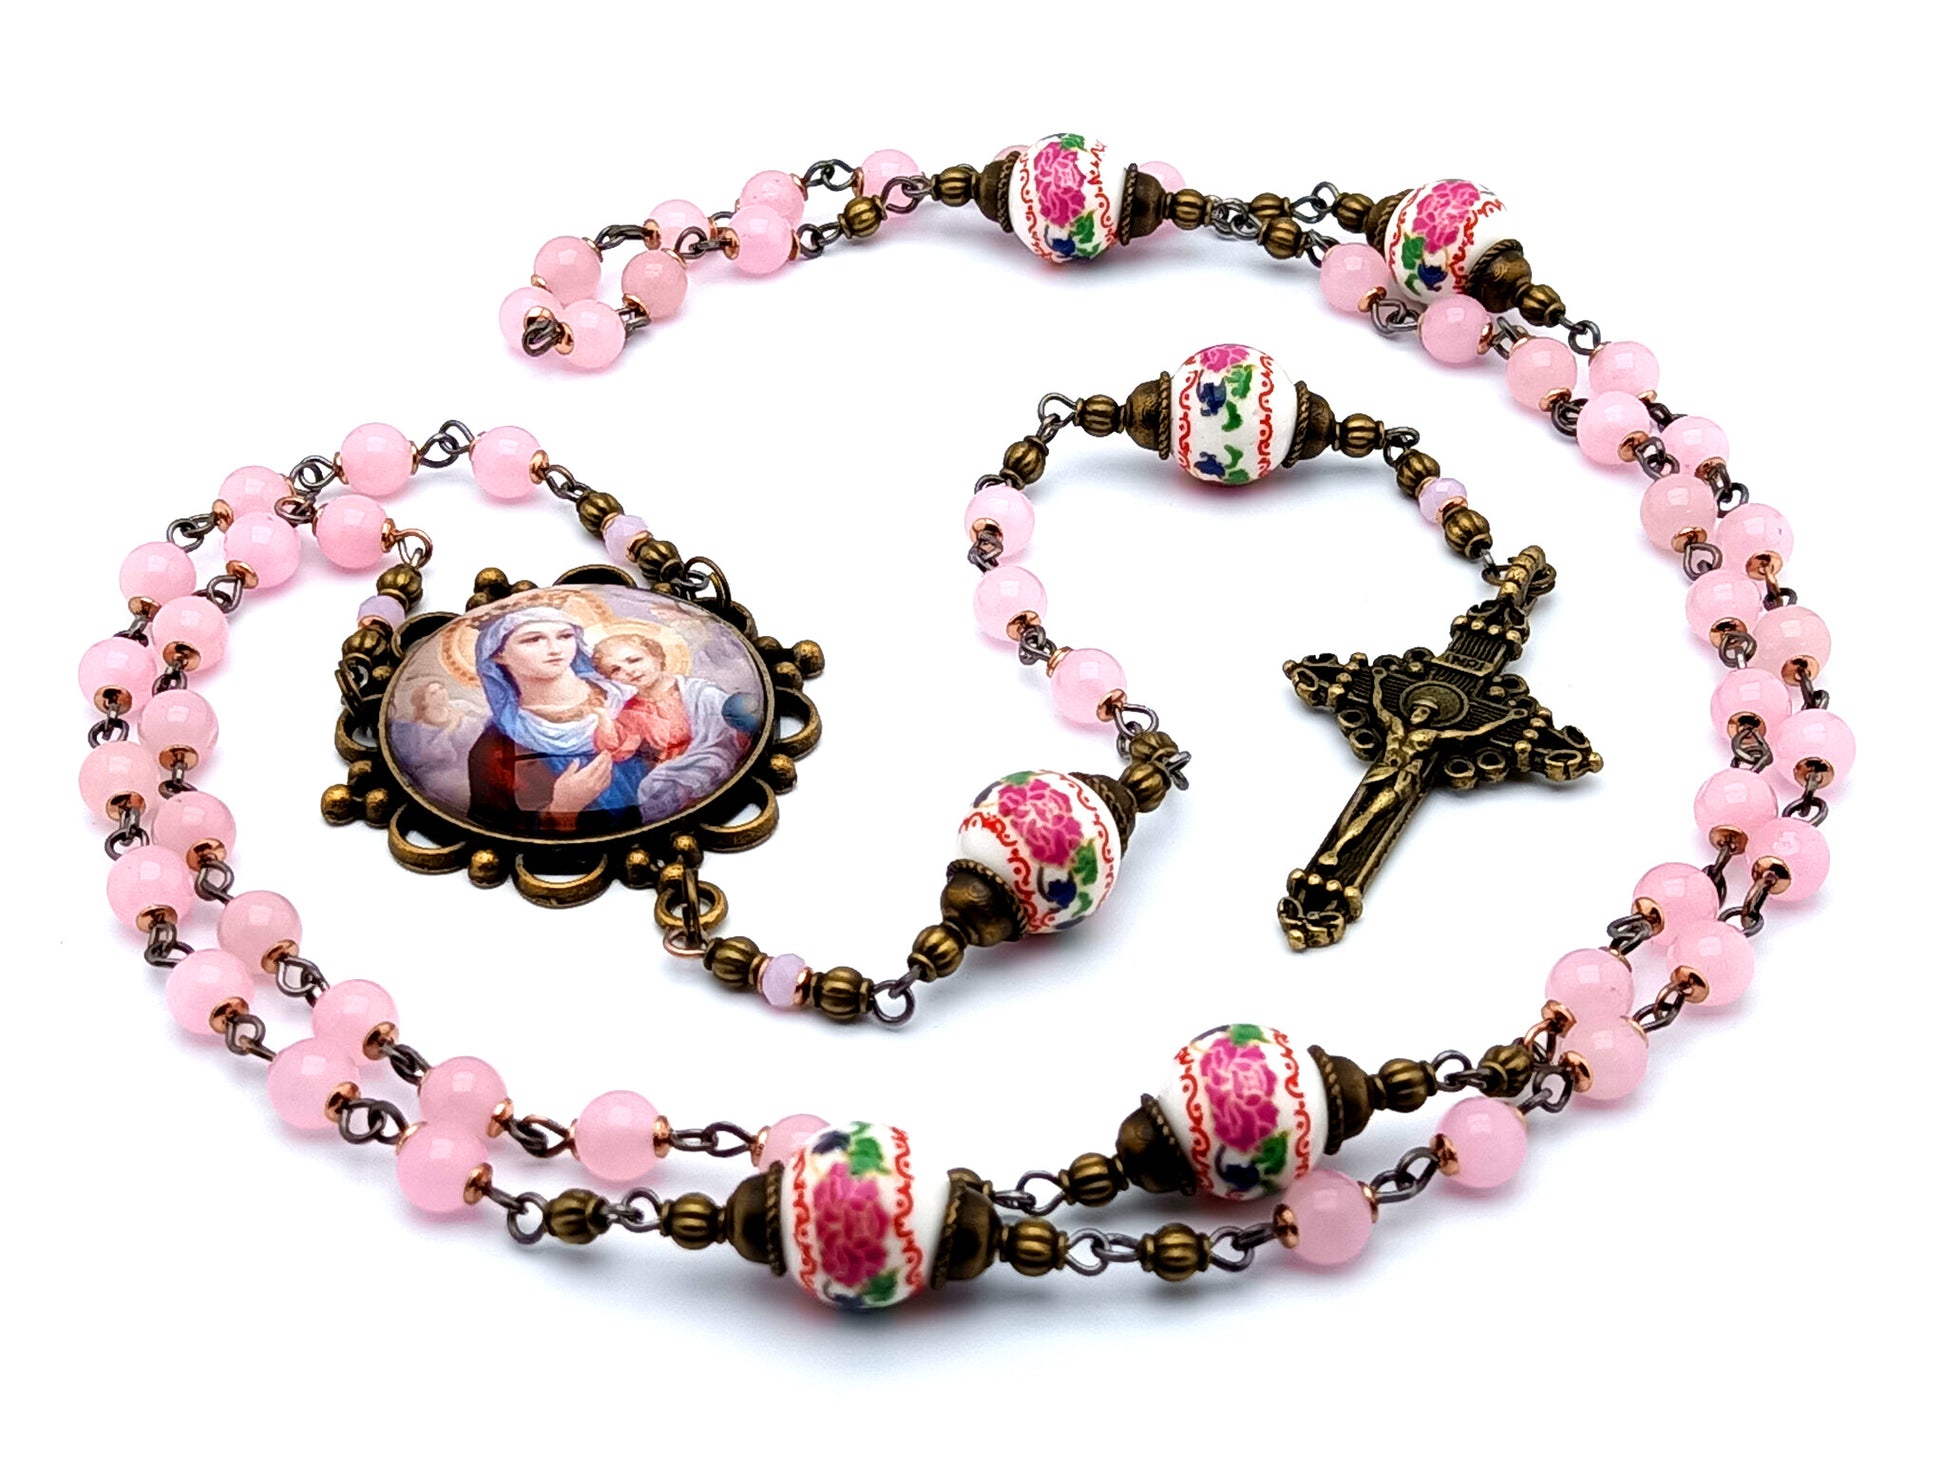 Our Lady of Perpetual help unique rosary beads with vintage style rose quartz gemstone and porcelain beads and a brass crucifix.